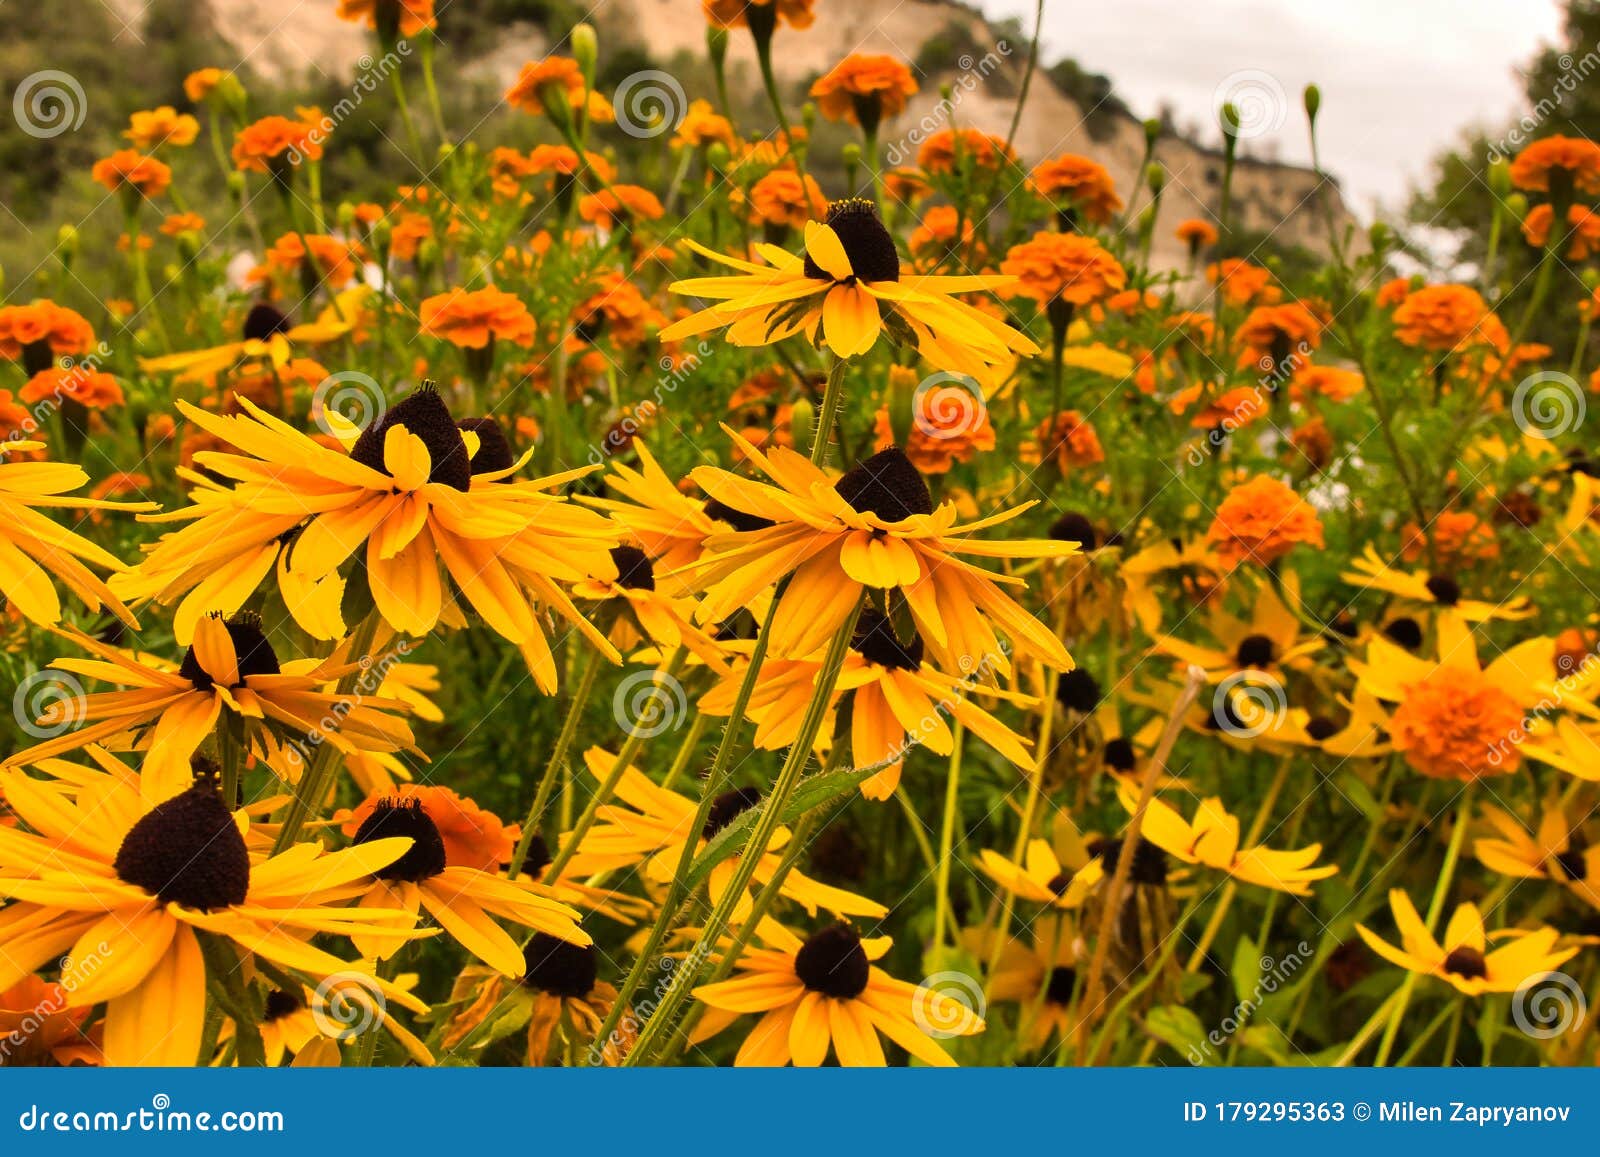 meadow yellow flowers, sunny spring fowers blooming